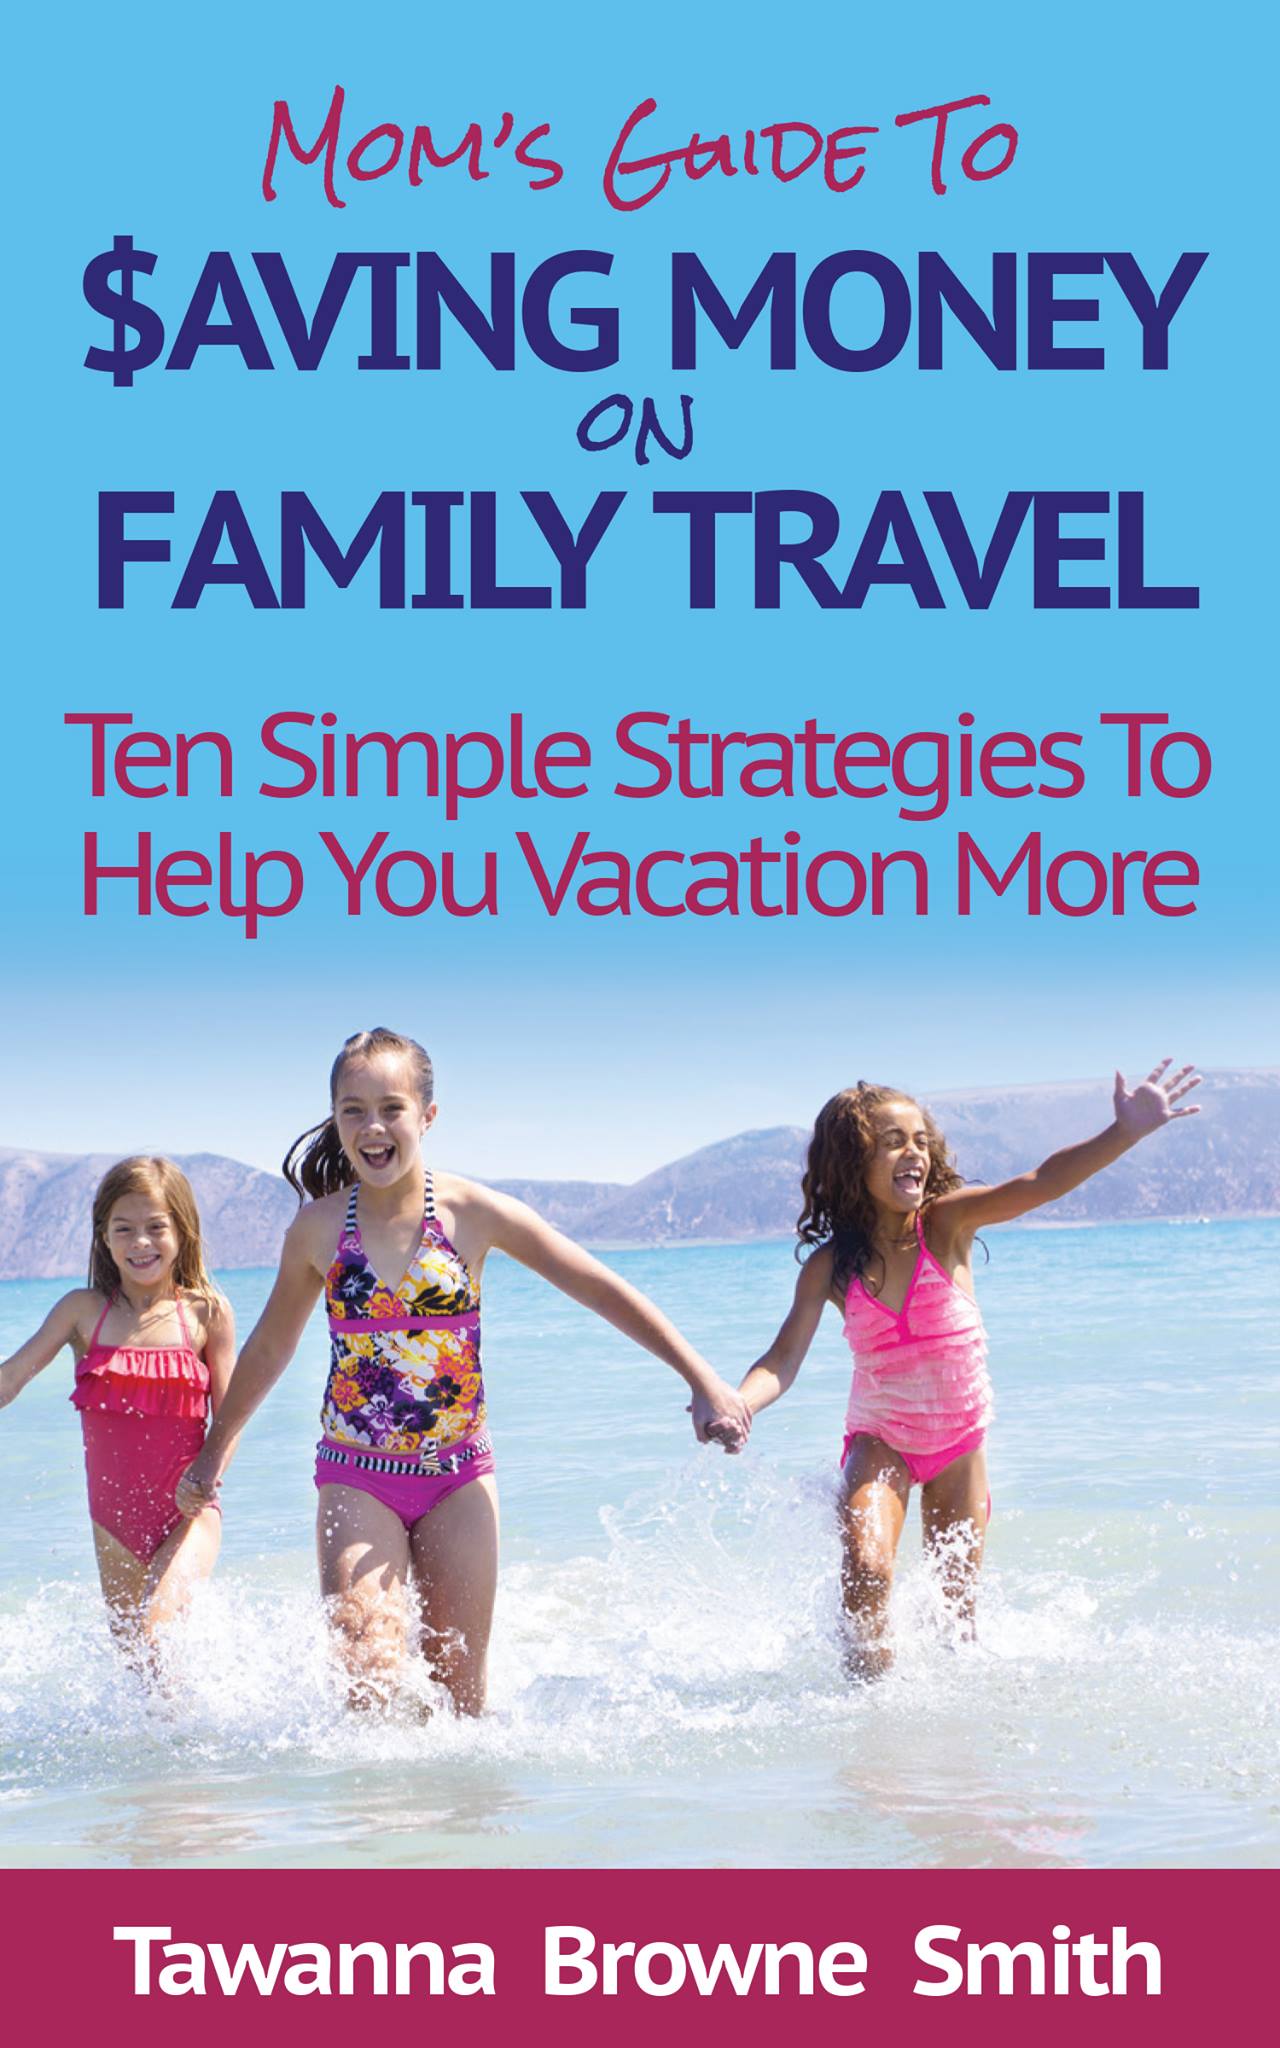 Moms Guide to Saving Money on Family Travel